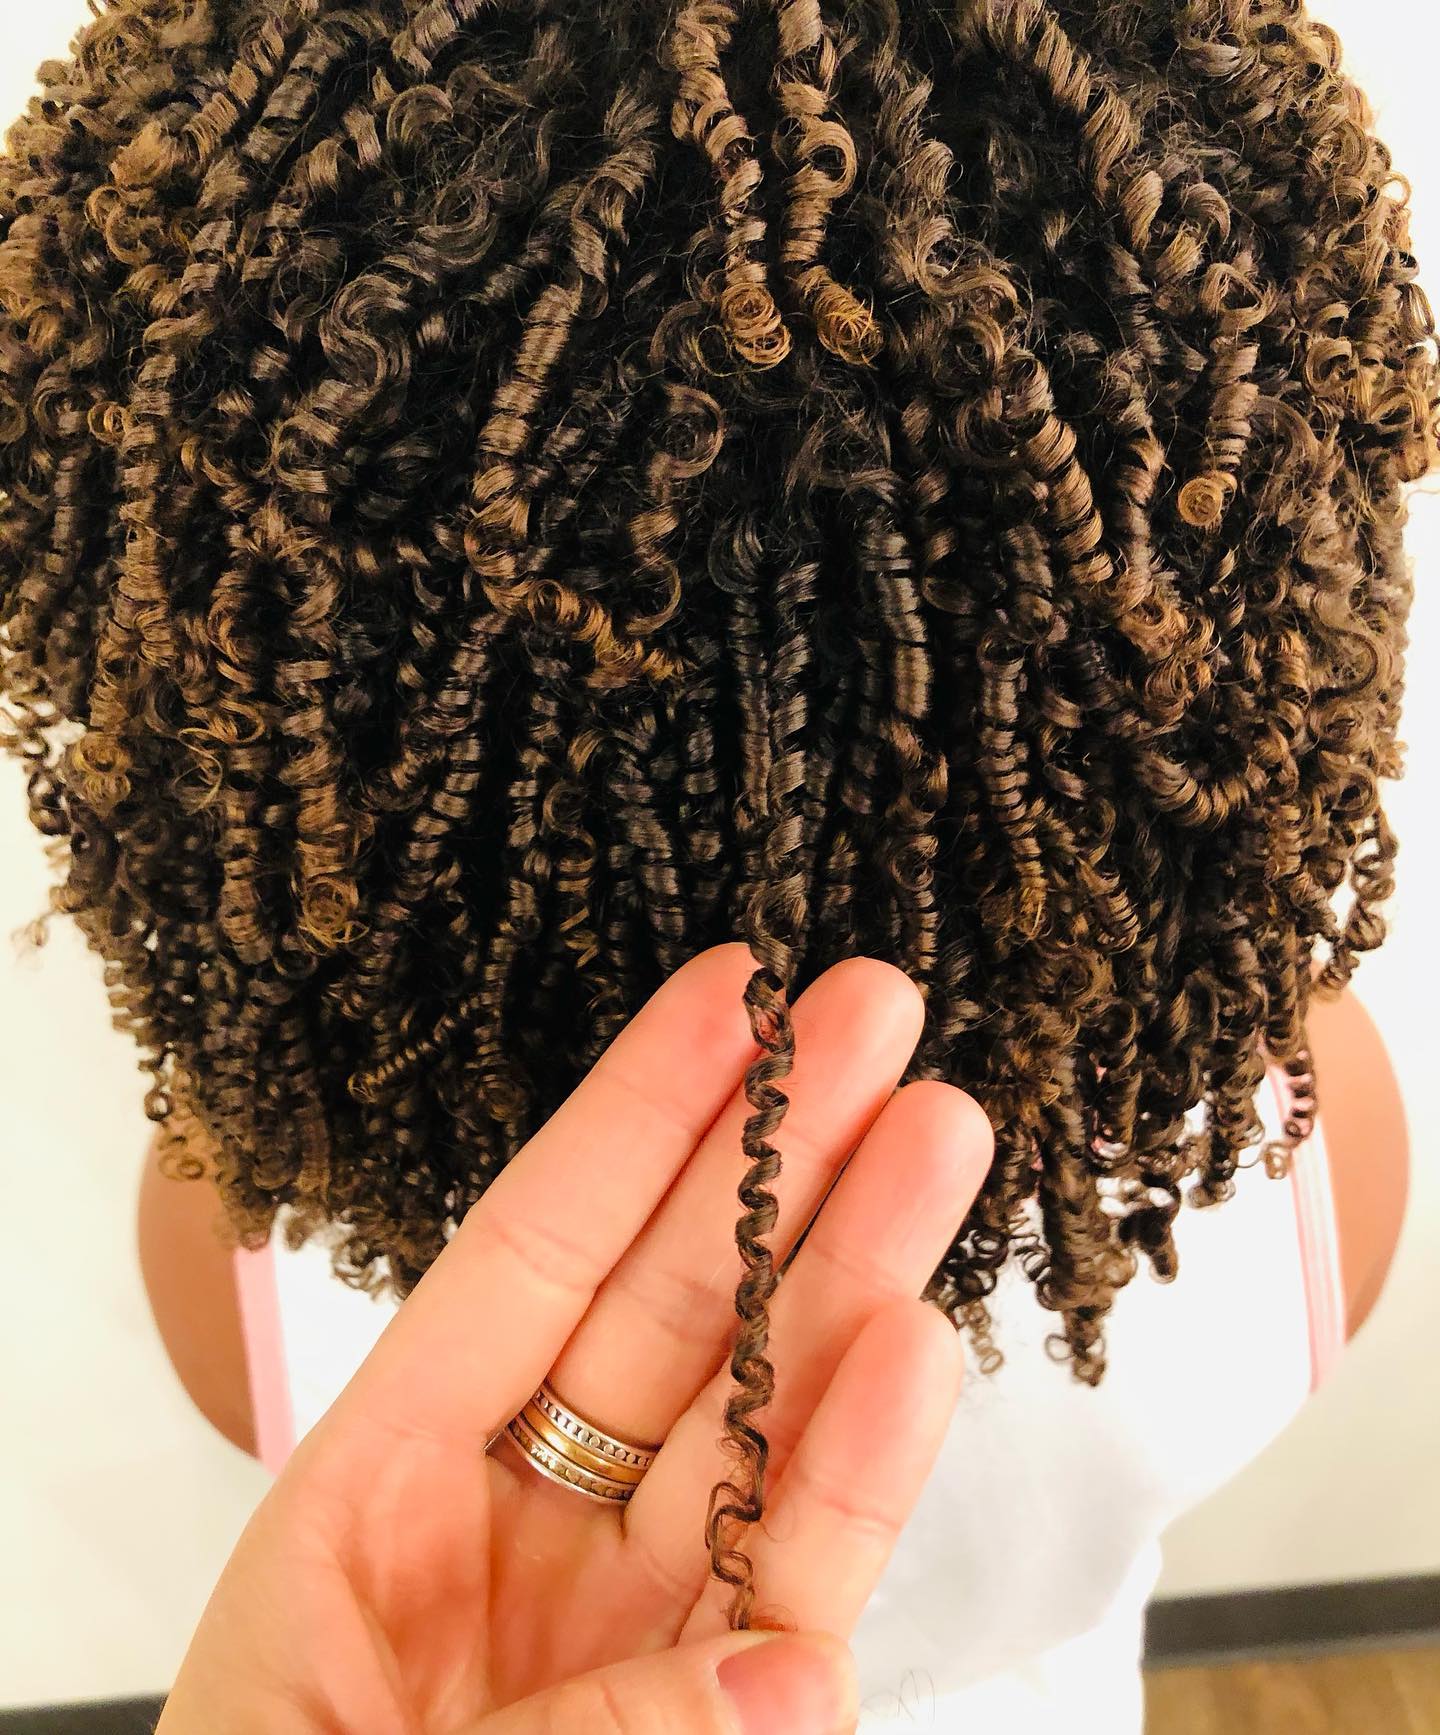 7 Tips to Treat Curl Breakage, Curly Hair Care